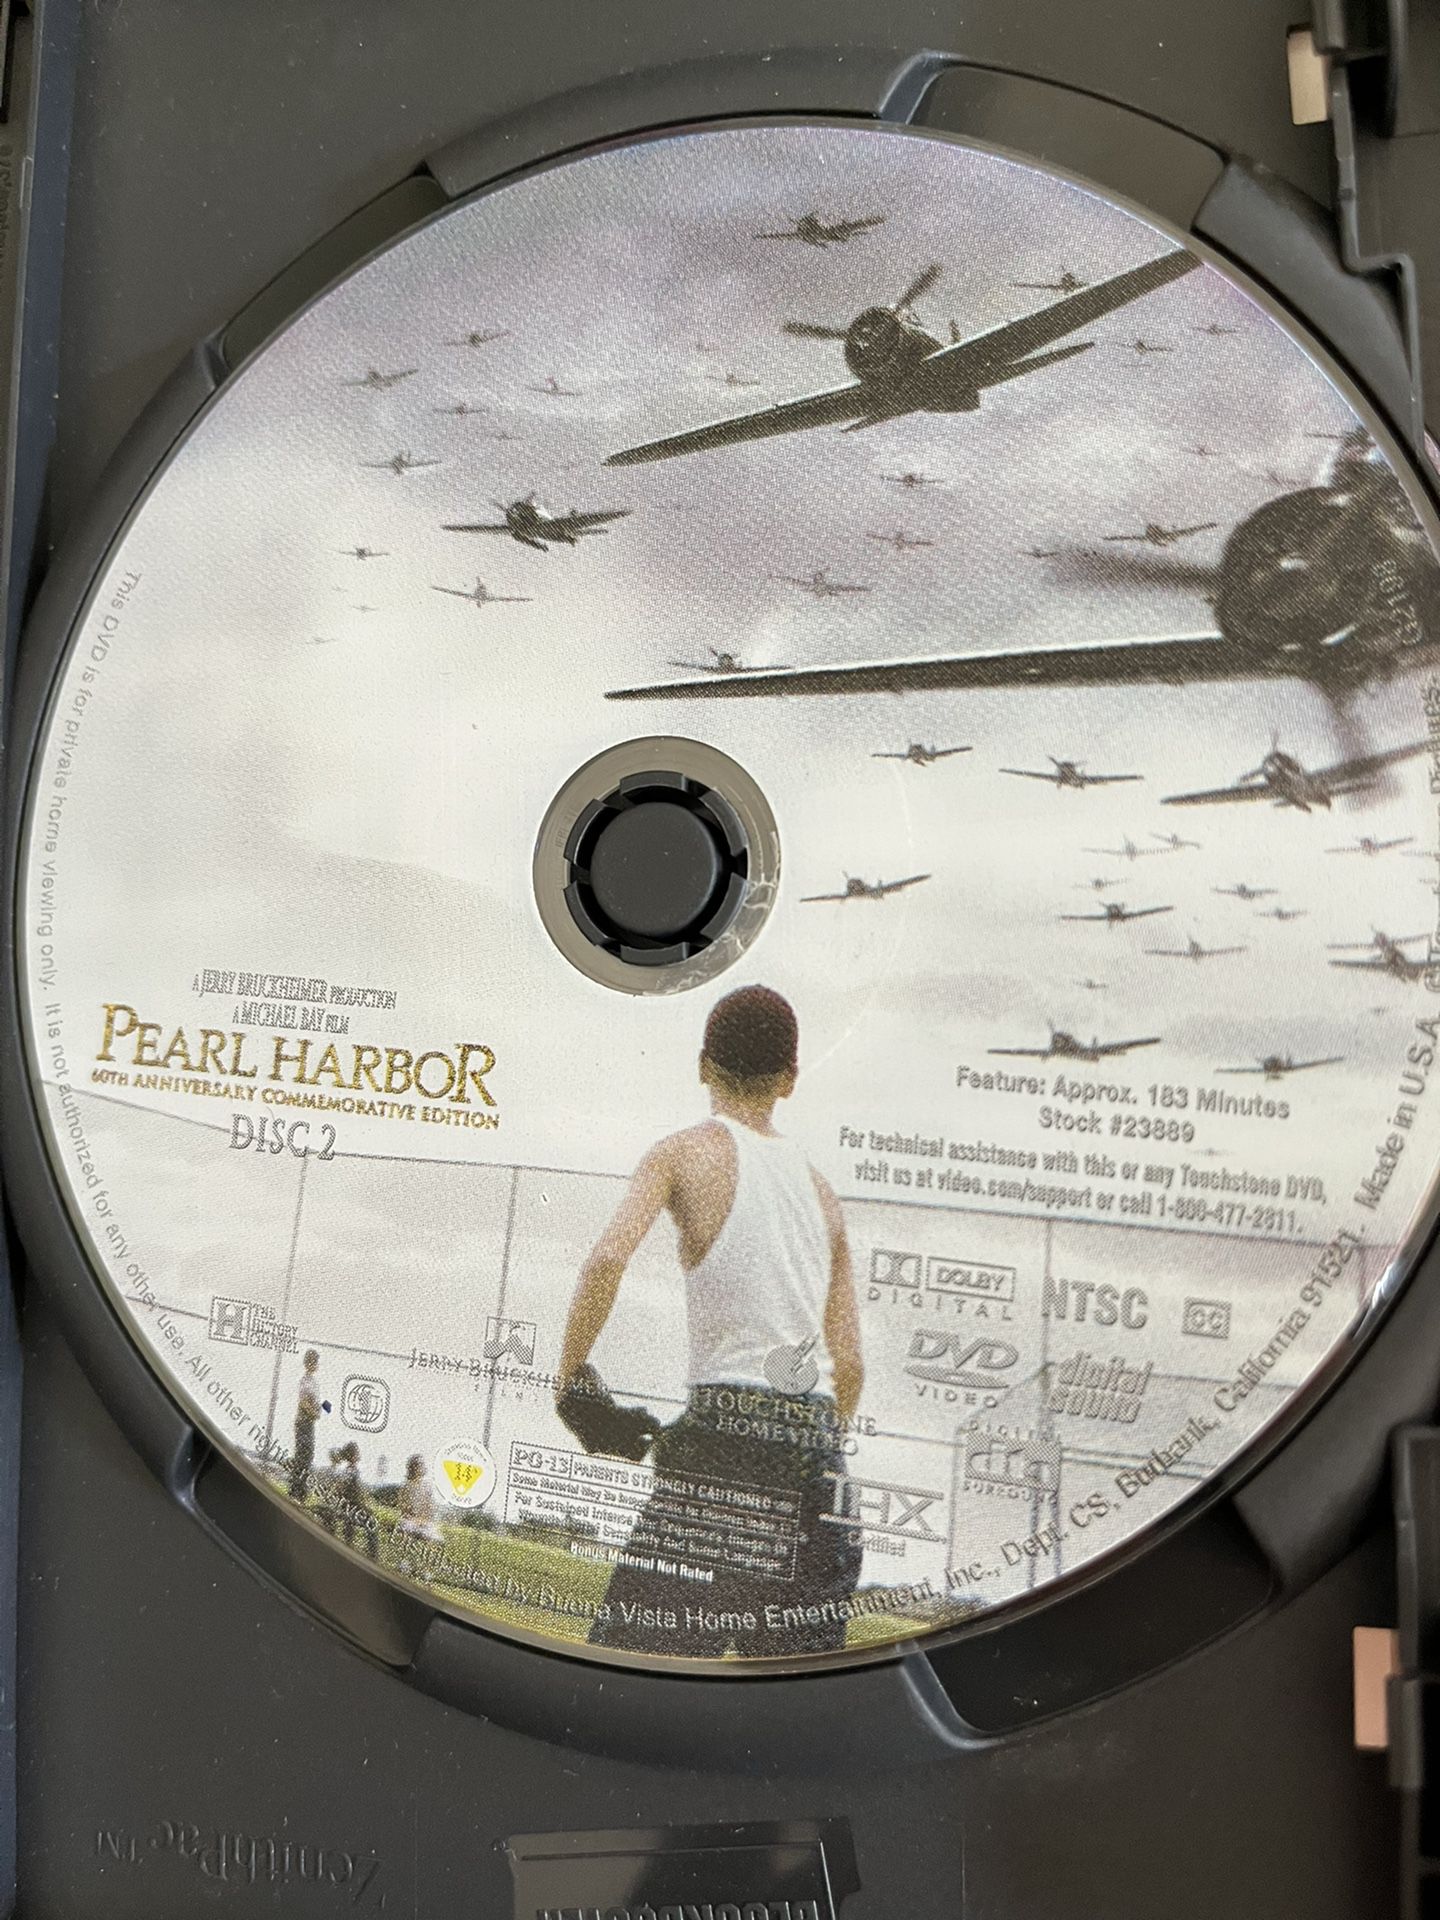 Pearl Harbor DVD With Anniversary Commemorative Edition PG 13 for